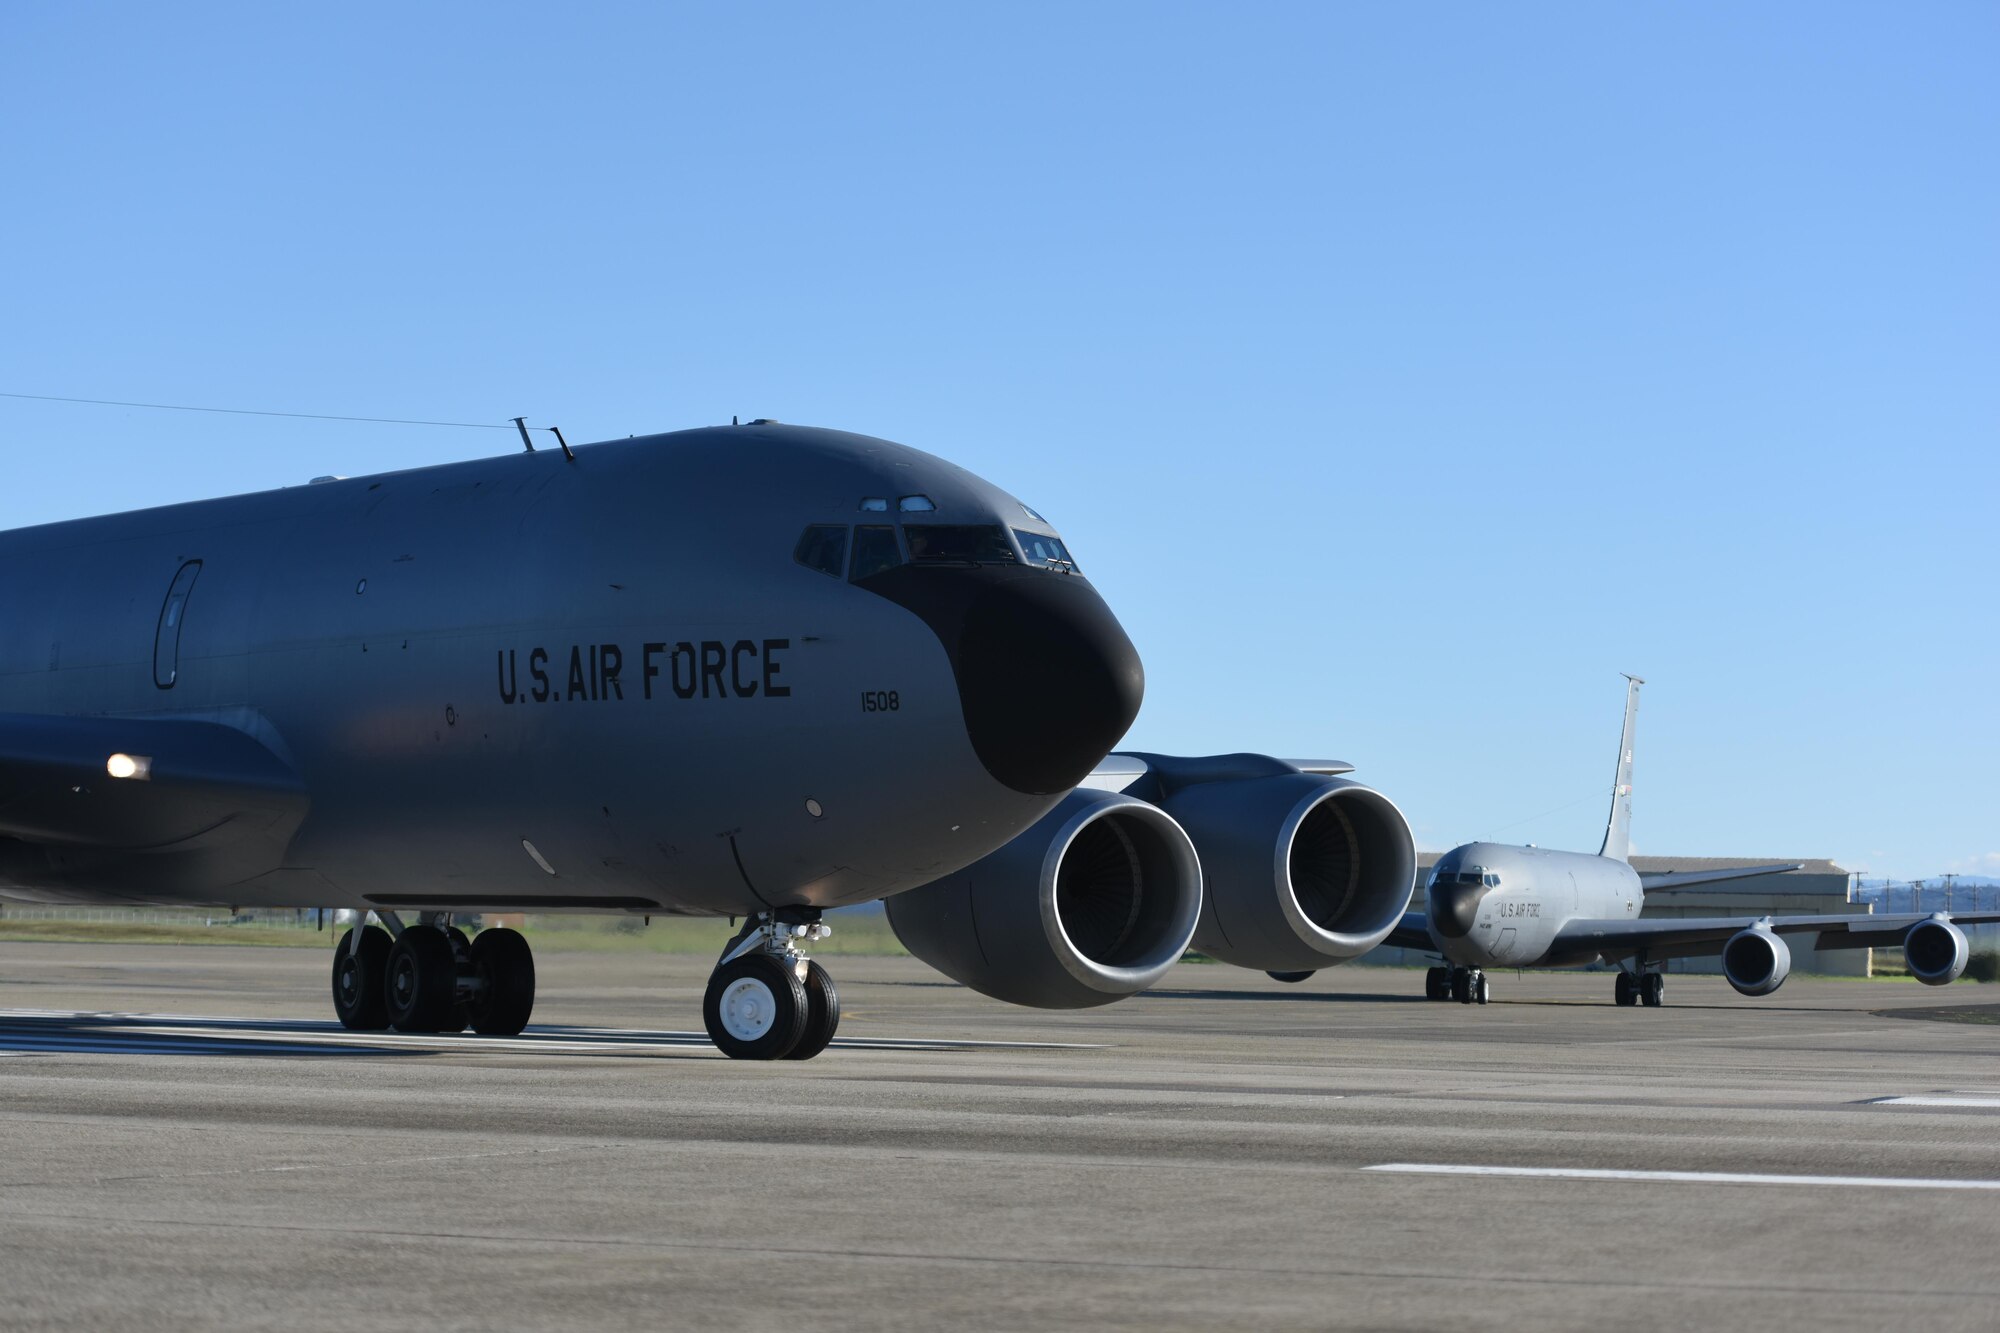 A KC-135 Stratotanker from the 314th Air Refueling Squadron turns the corner as it taxis down the runway as part of a two-ship aircraft formation on Saturday Feb. 11, 2017 at Beale Air Force Base, California during a unit training assembly. The two aircraft took off minutes apart as part of a routine training sortie. Between the two aircraft, they refueled eight F-15 Eagles from the 173rd Fighter Wing stationed at Kingsley Field Air National Guard Base, Oregon. (U.S. Air Force photo by Staff Sgt. Brenda Davis).